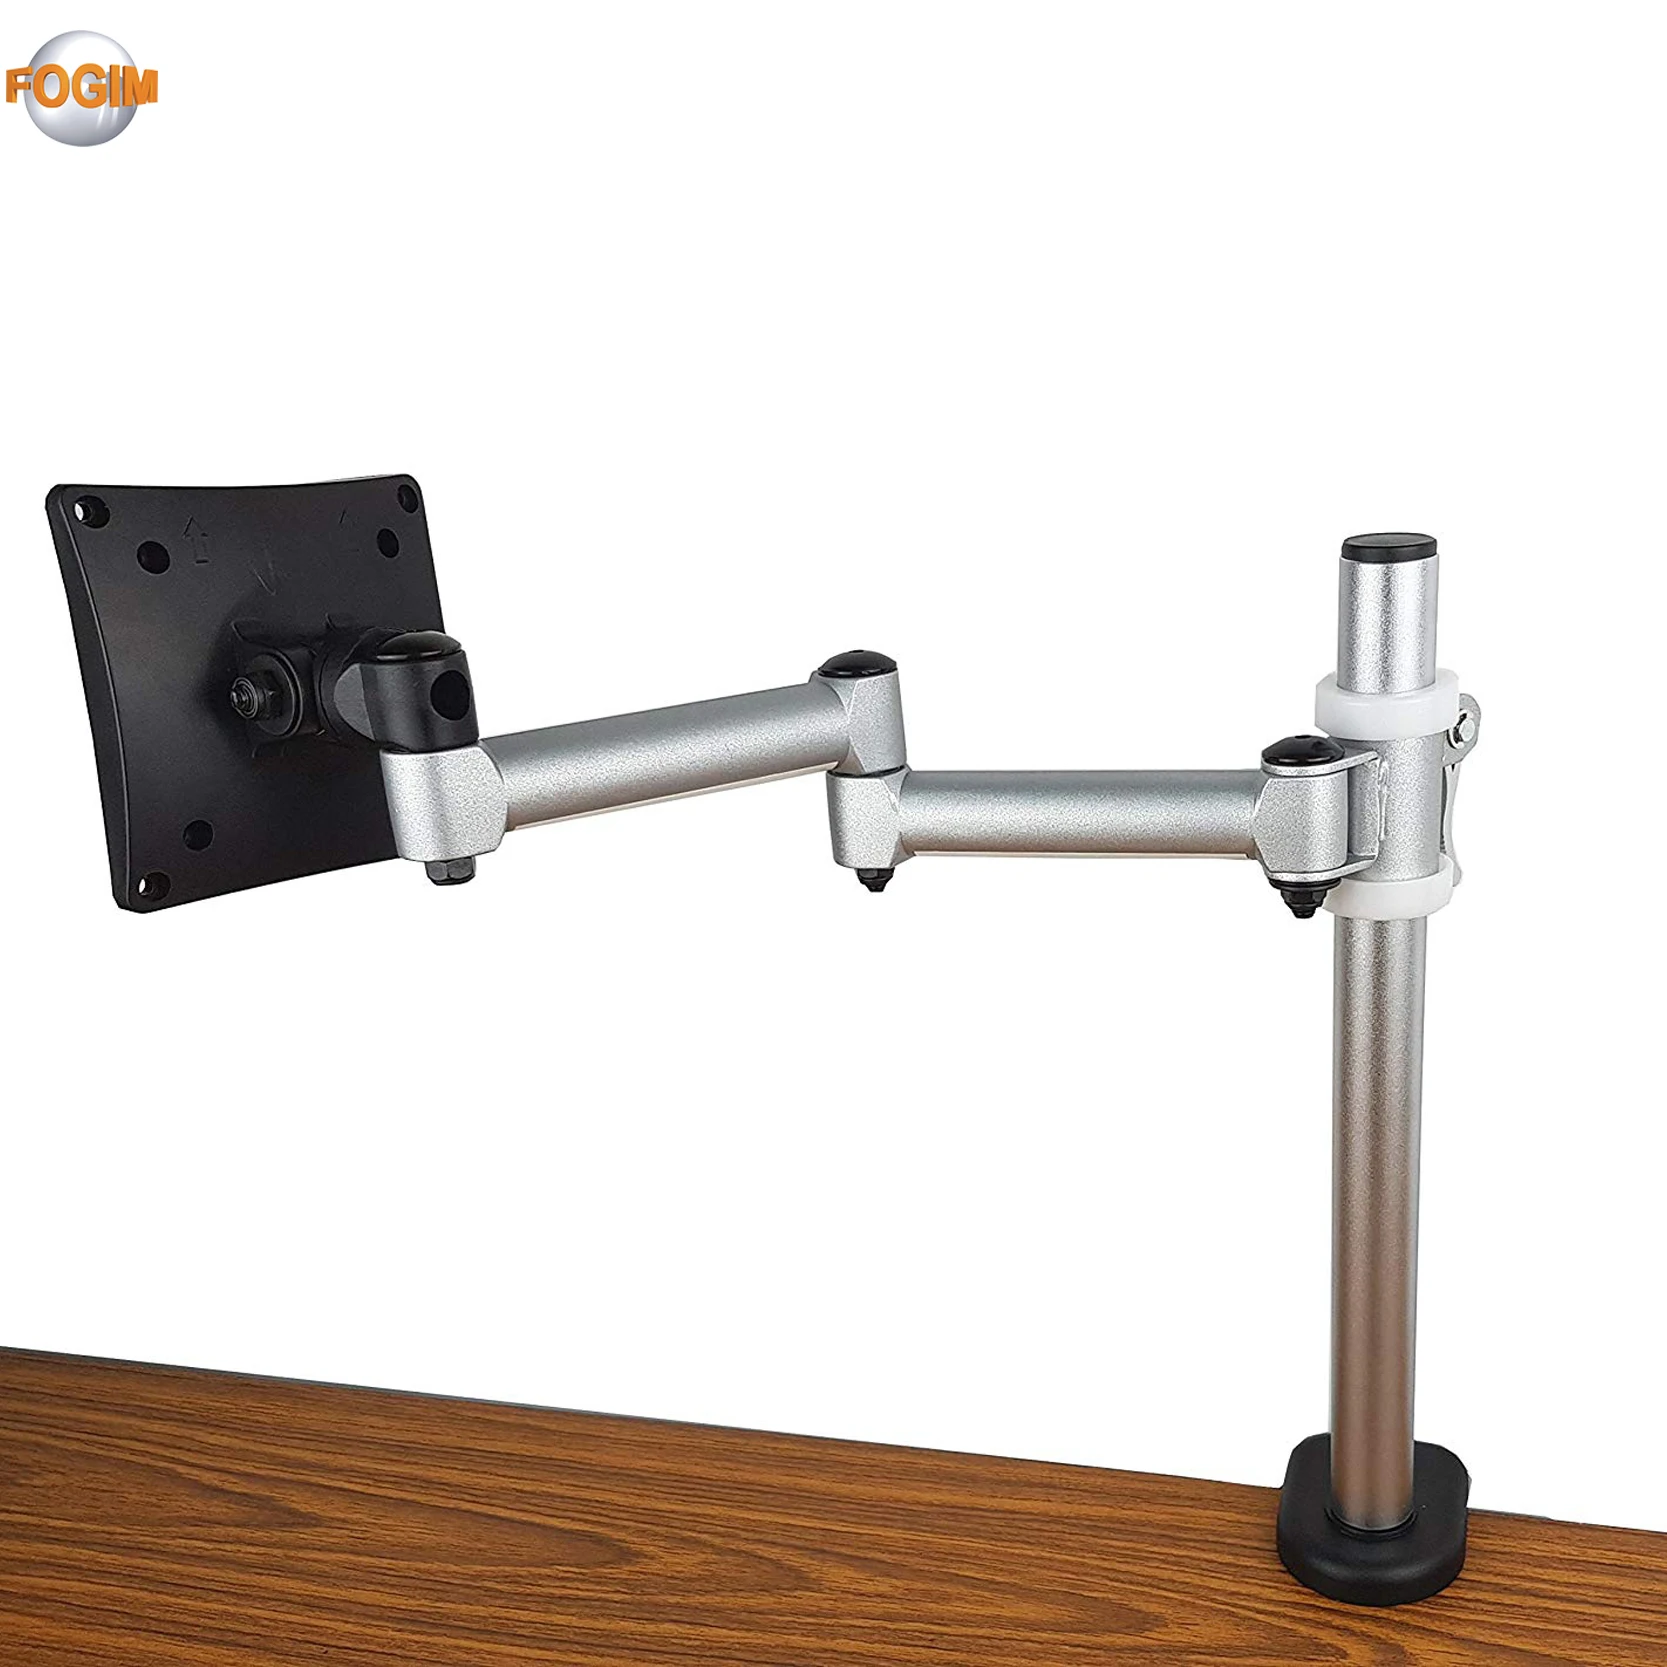 45 Degree Monitor Holder With Quick Release Lever On Table Through